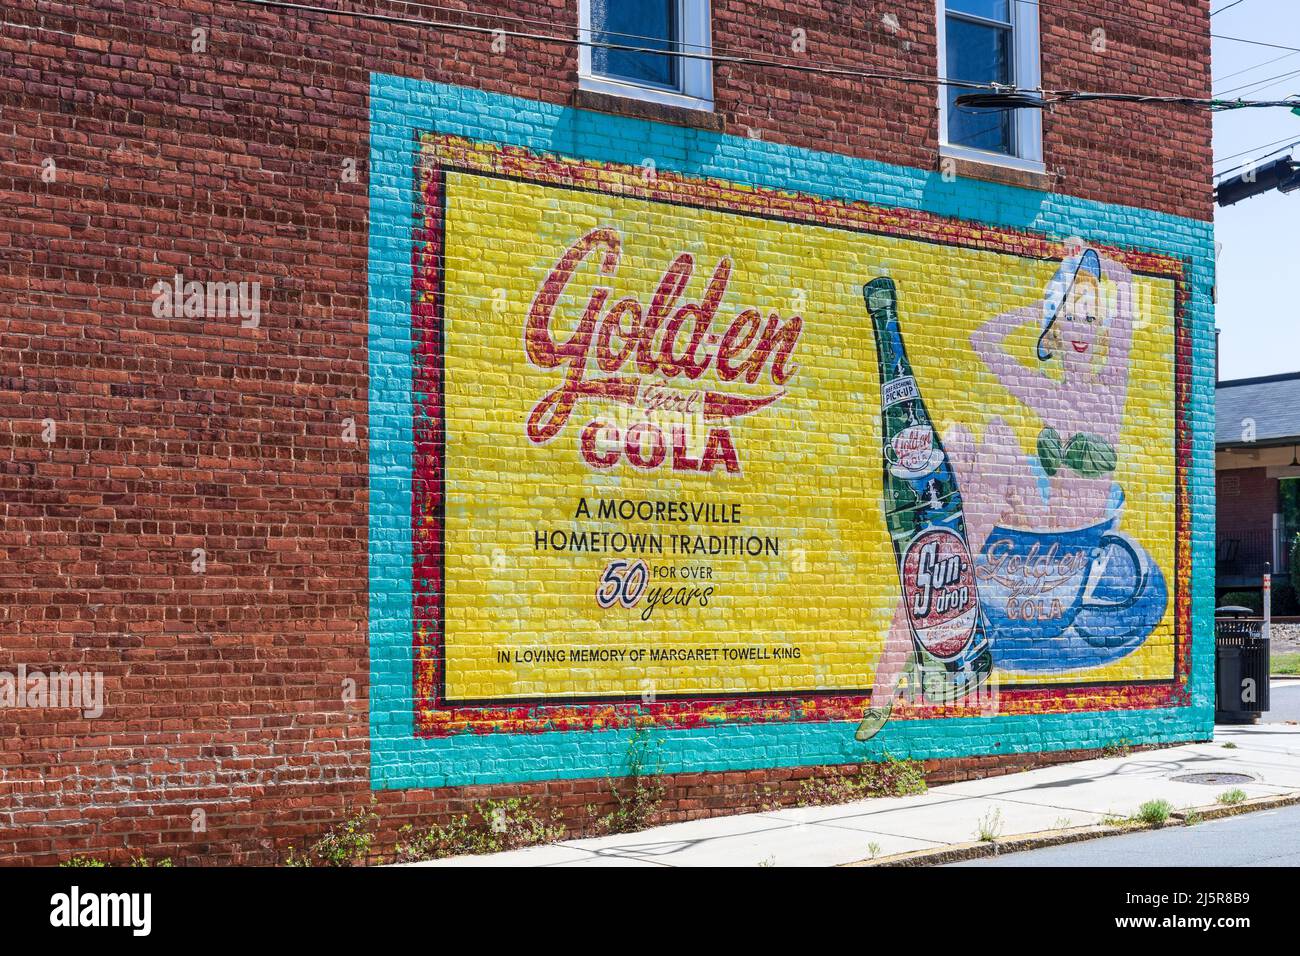 MOORESVILLE, NC, USA-17 APRIL 2022: An historic advertising painted sign for Sun-drop cola, Golden Girl Cola, 'a Mooresville Hometown Tradition for ov Stock Photo